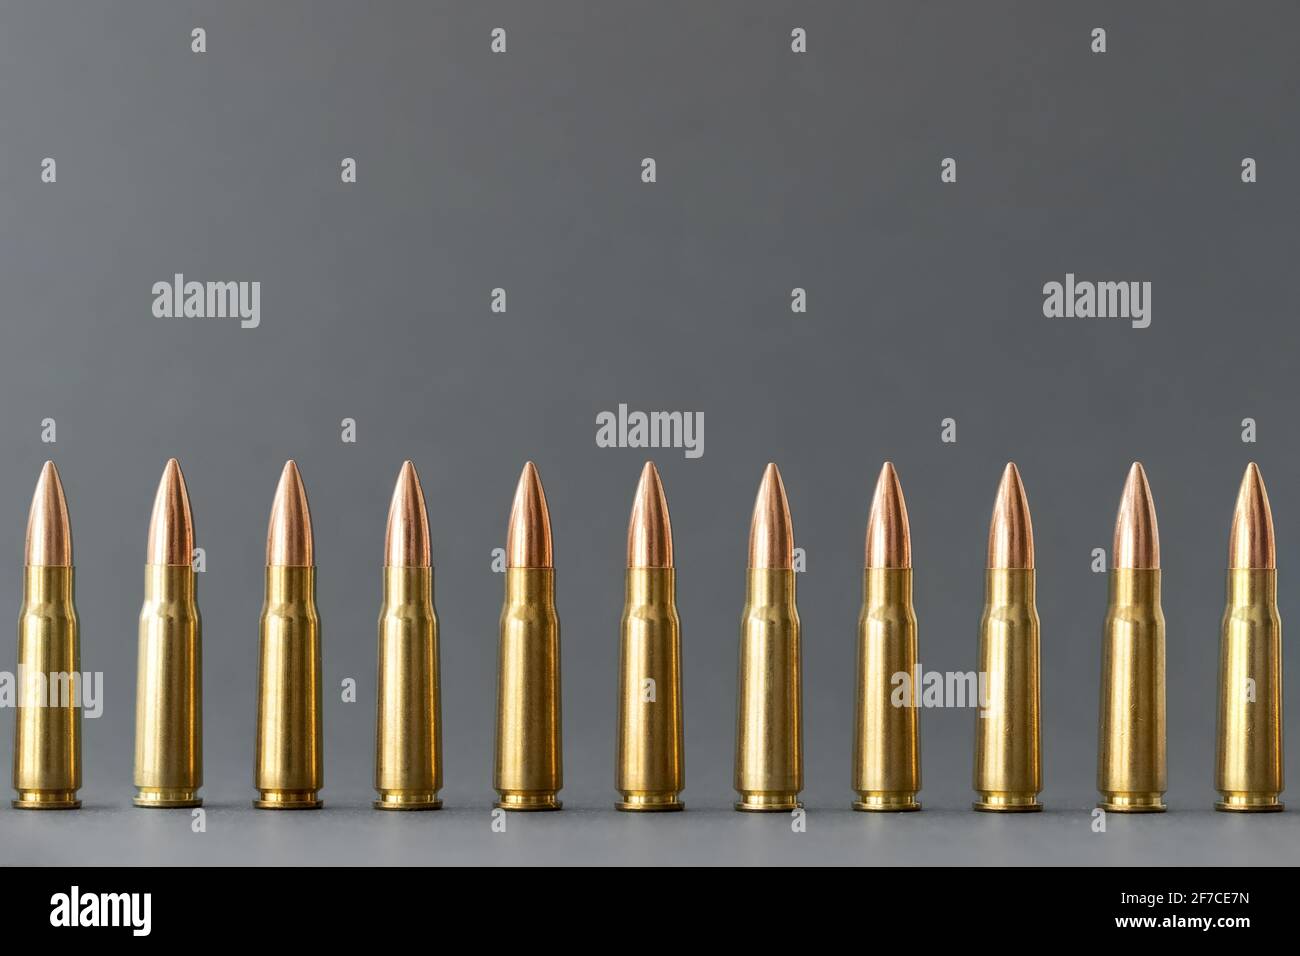 Bullets on gray background. Cartridges 7.62 caliber for Kalashnikov assault rifle closeup with copy space. Stock Photo